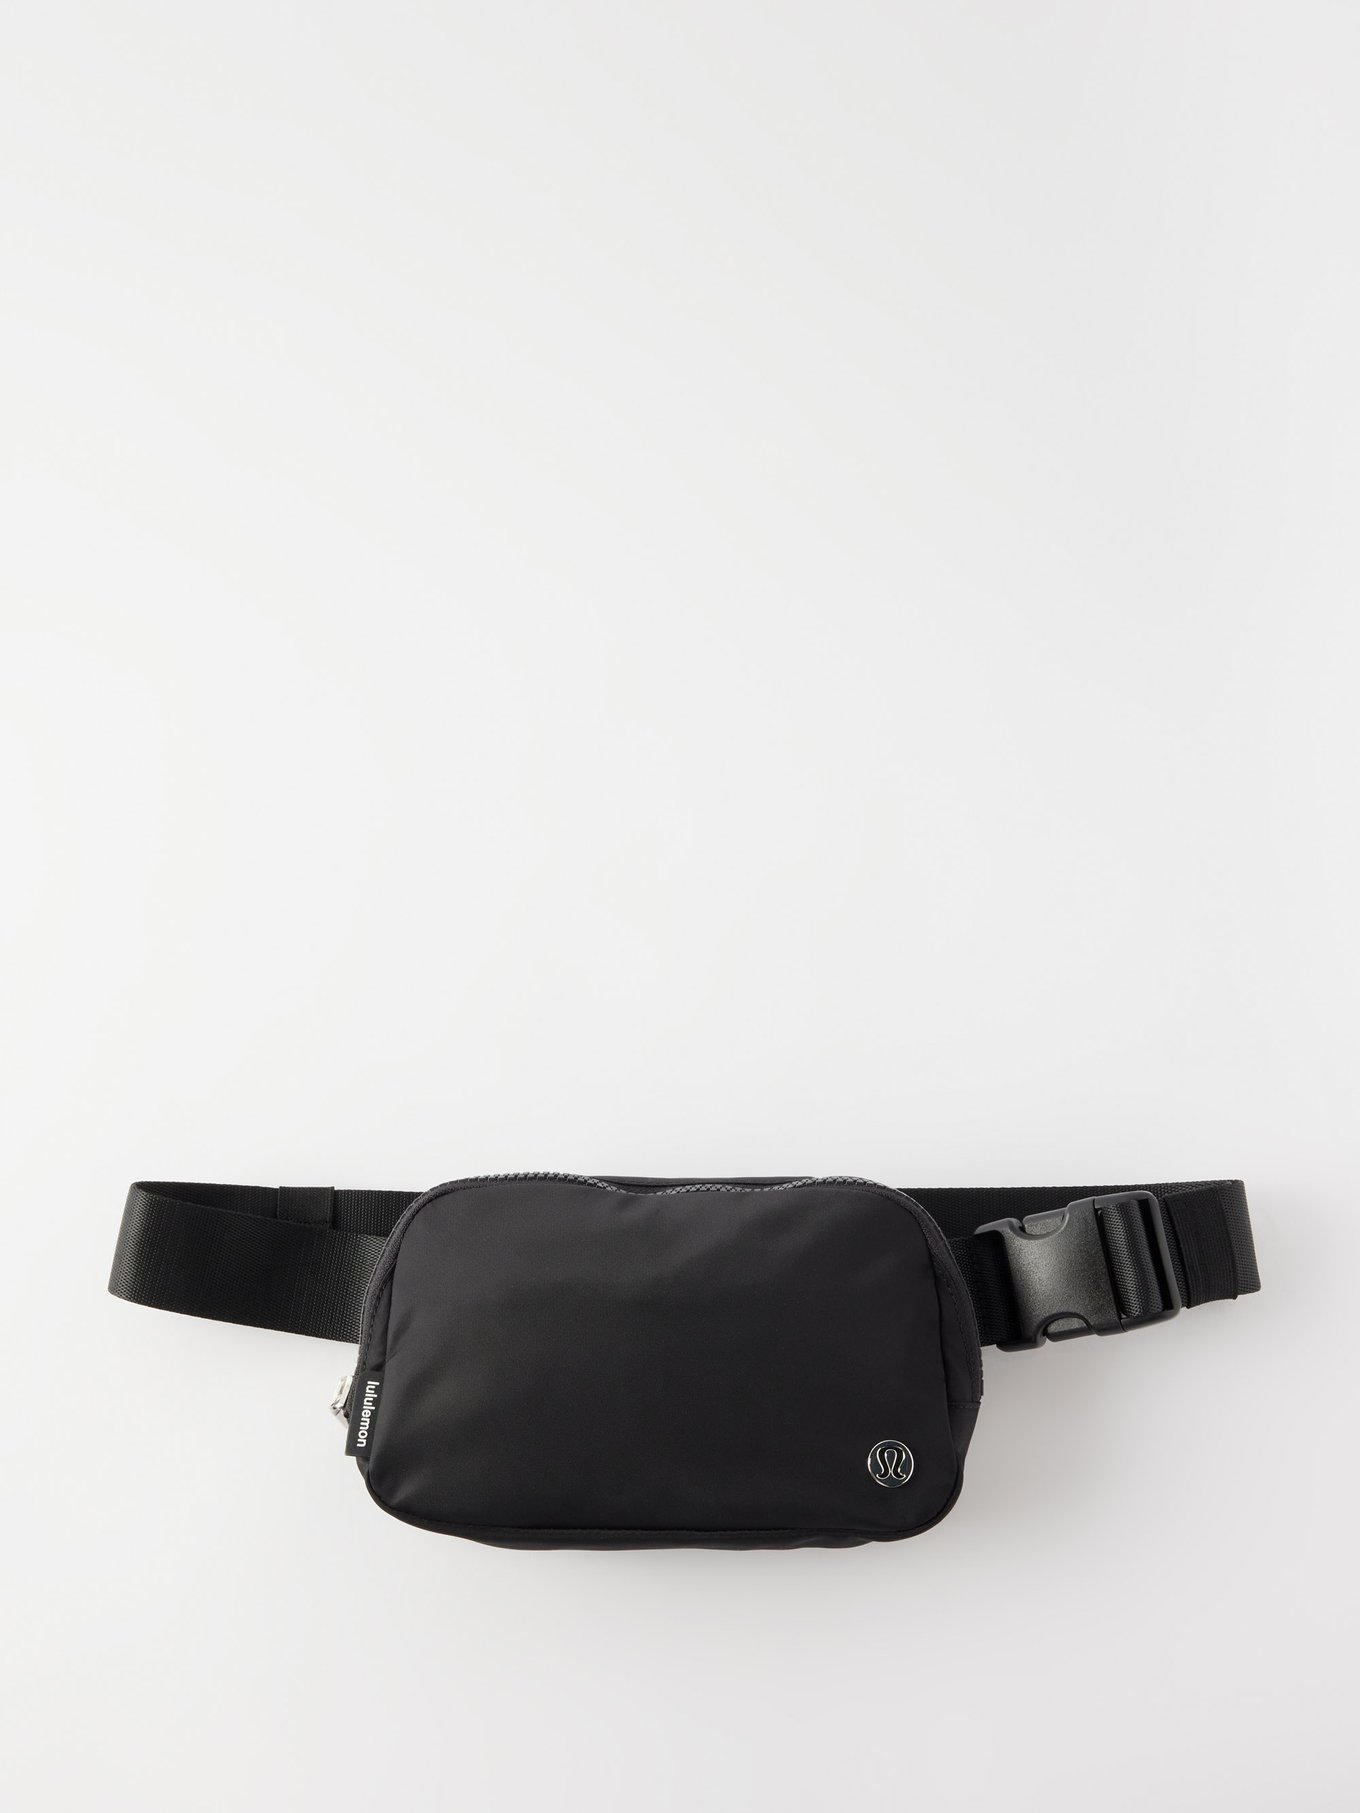 5 Lululemon Belt Bags My Teens and I Love, From $29